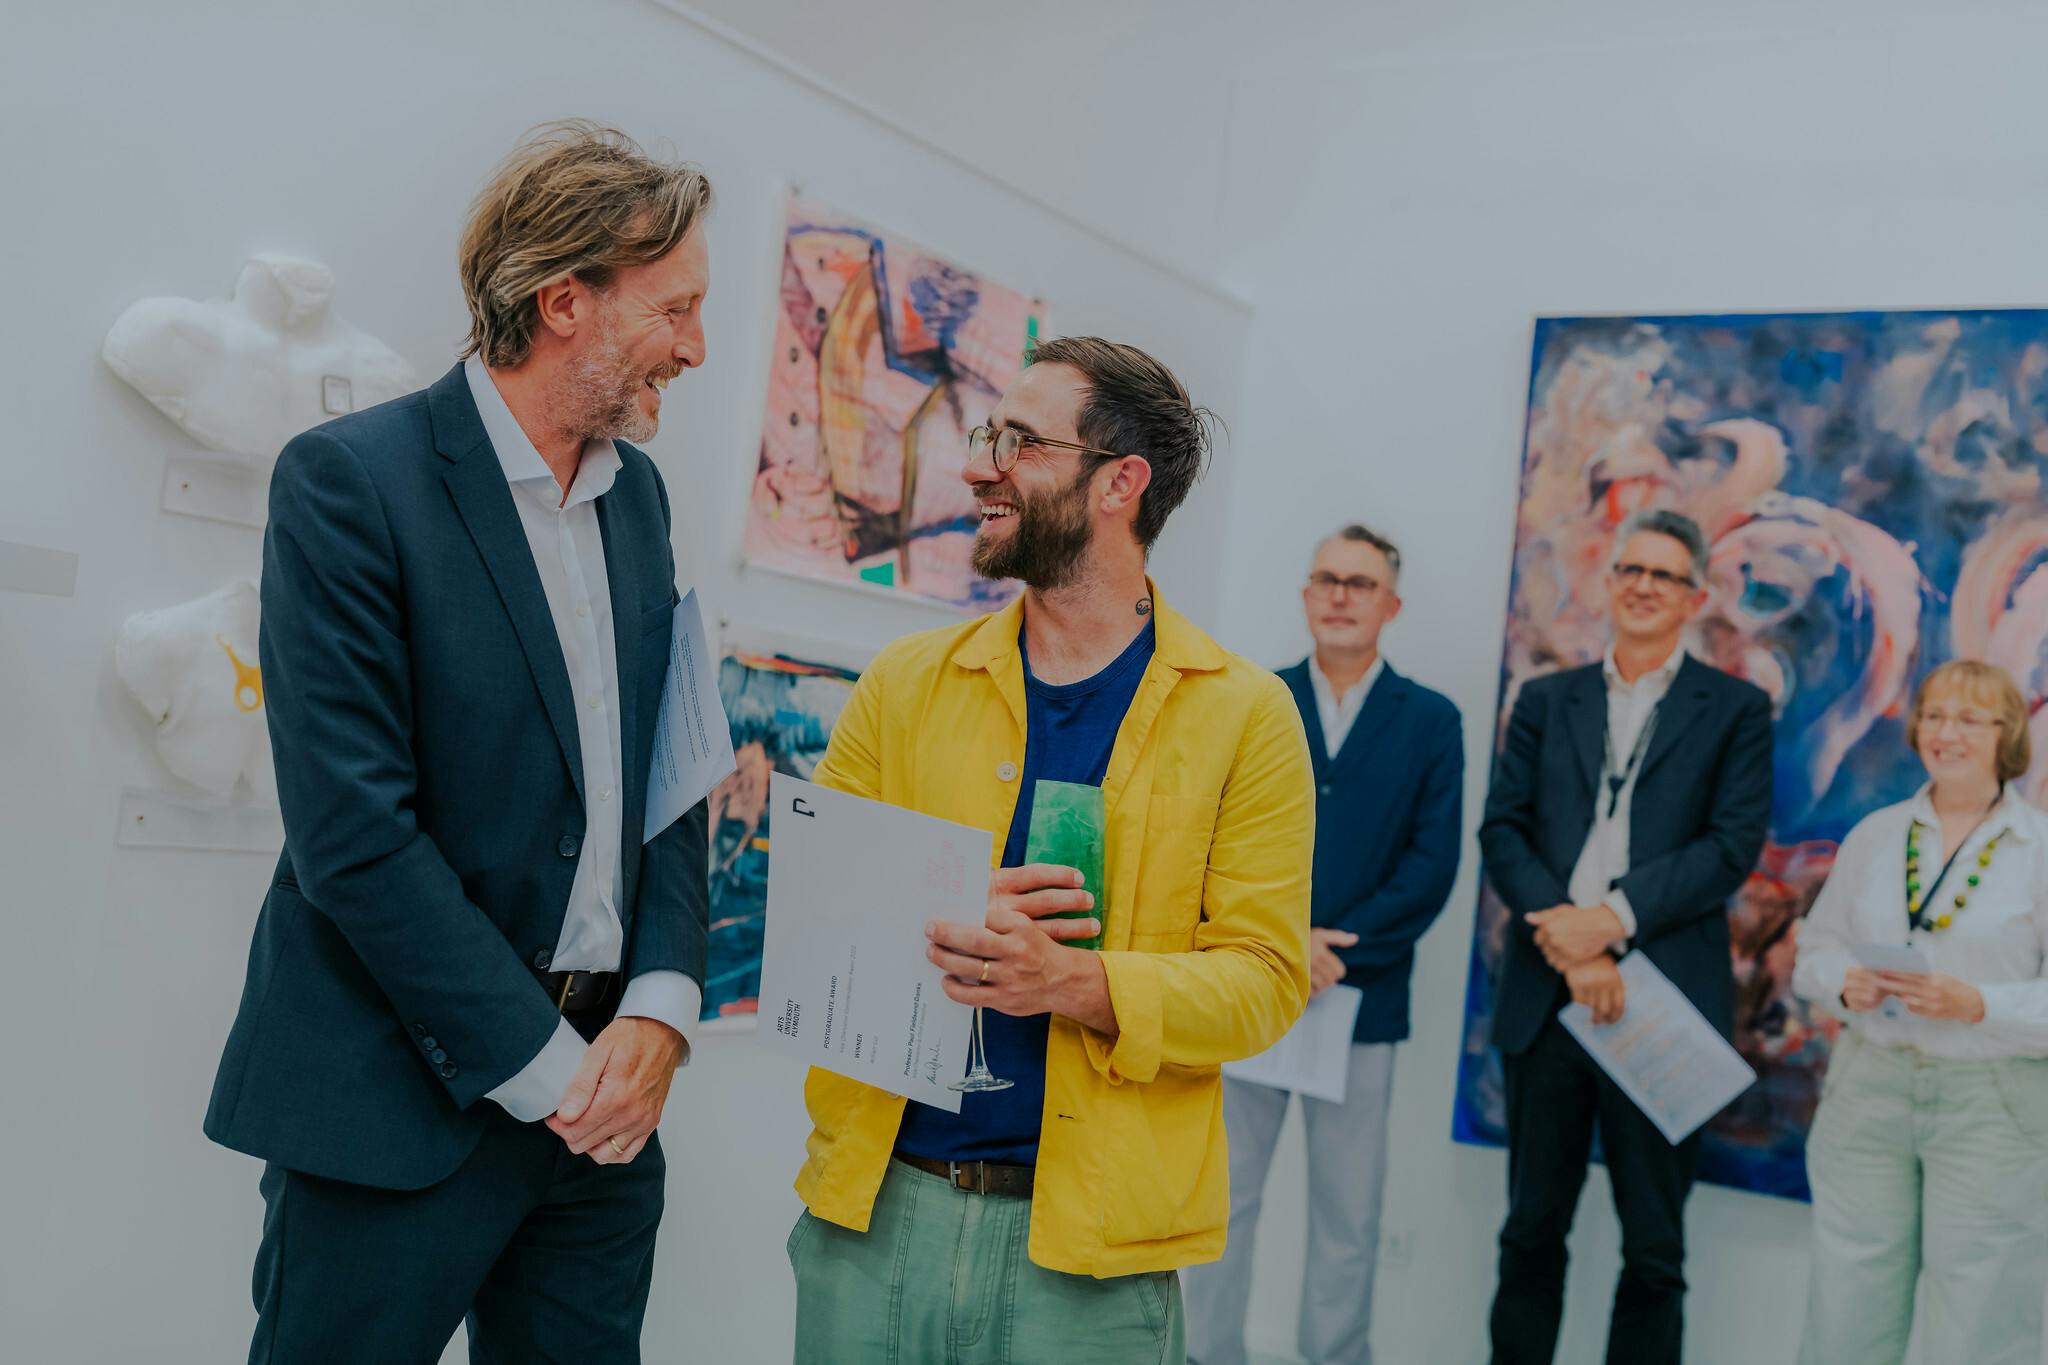 Vice Chancellor Paul Fieldsend-Danks smiling at MA student William Luz while Dr Stephen Paige, Prof Stephen Felmingham and Board of Governors Chair Sue Brownlow watch on in the background surrounded by colourful paintings